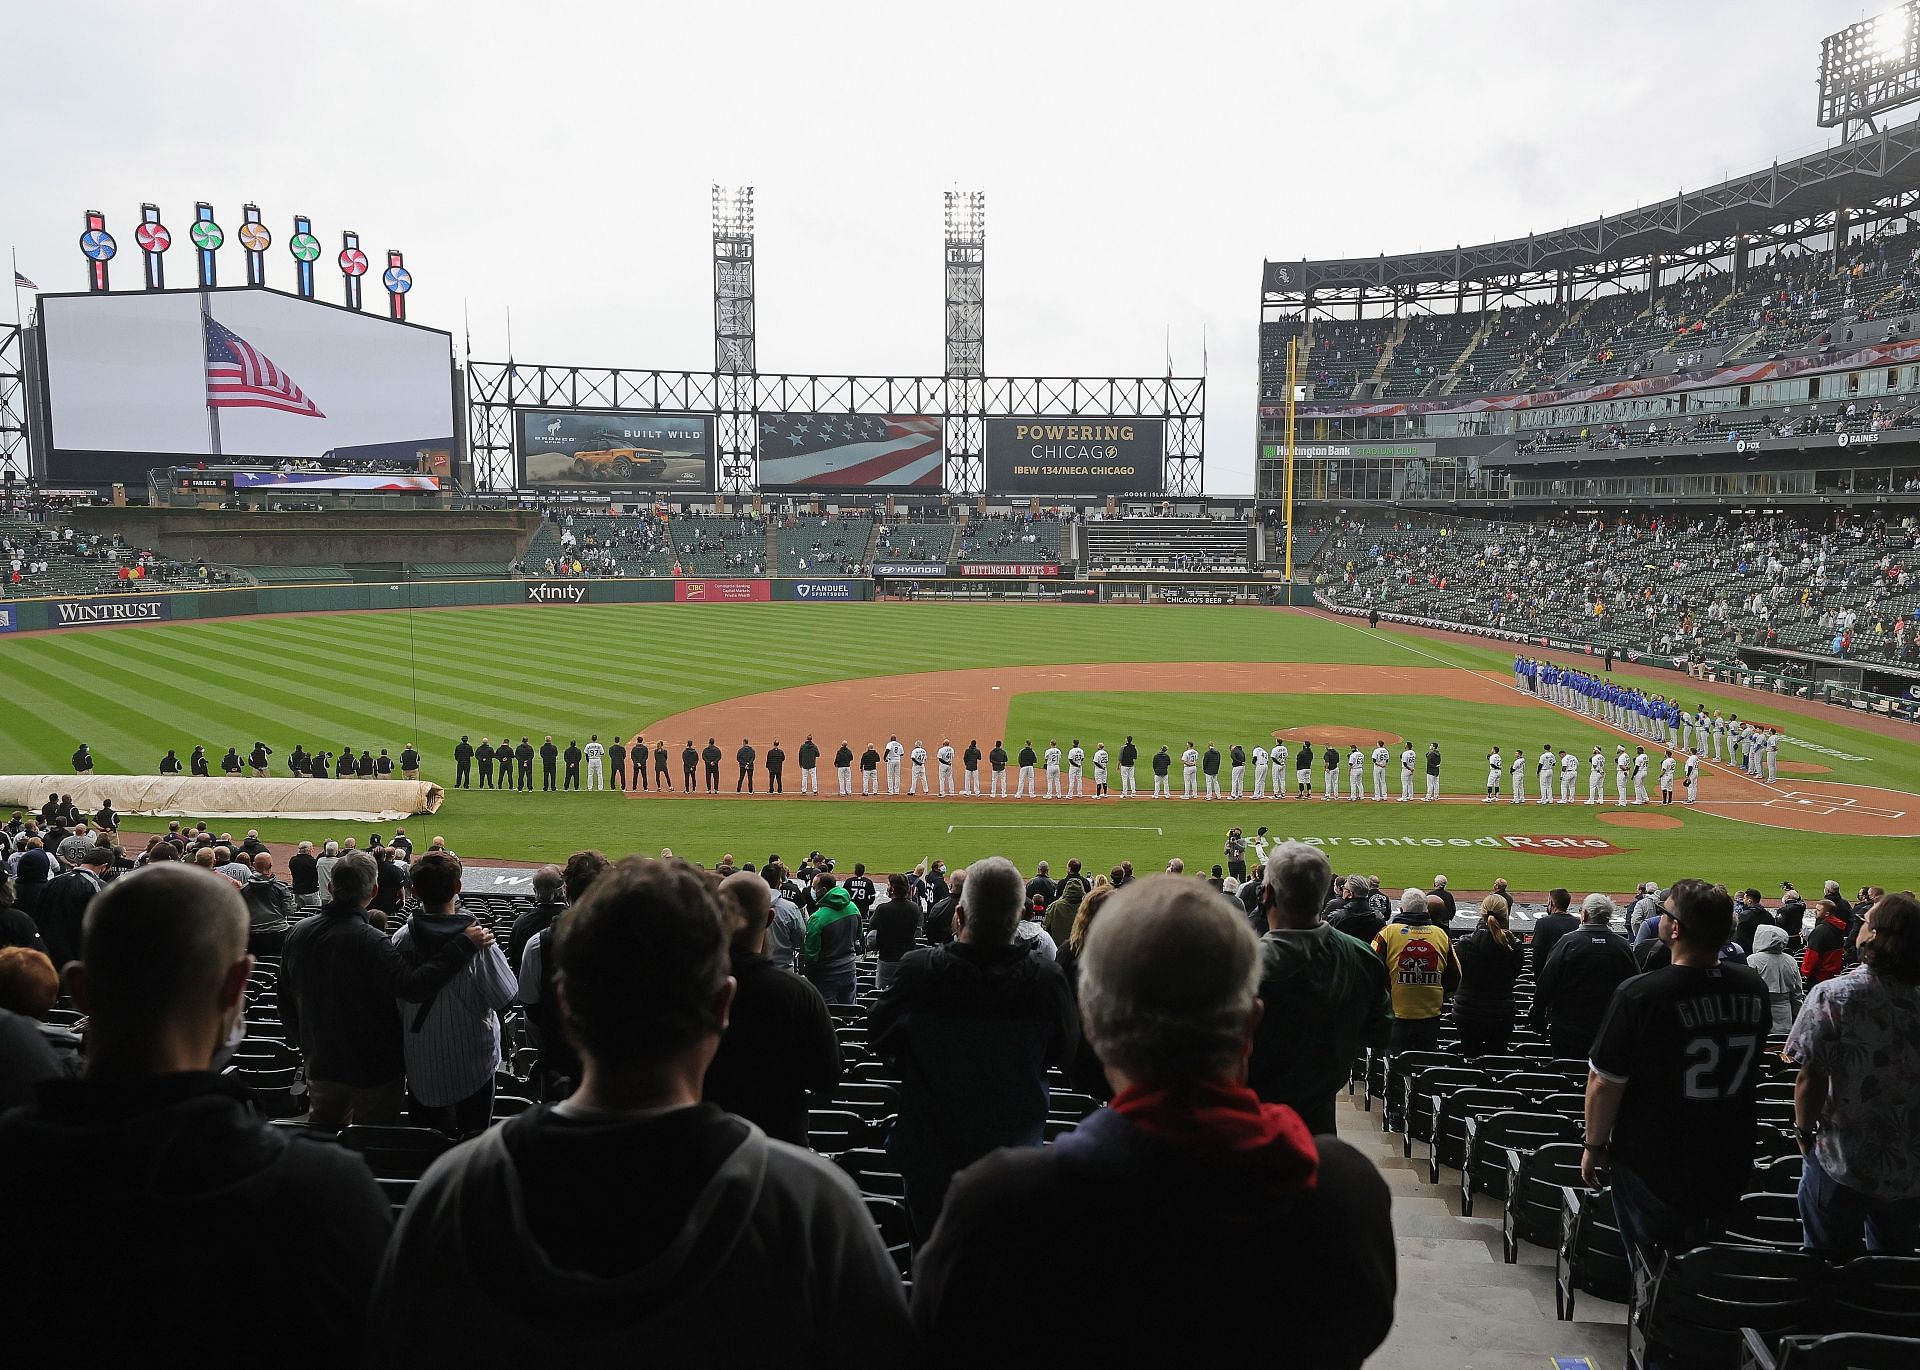 Opening Day 2021 at Comiskey Park